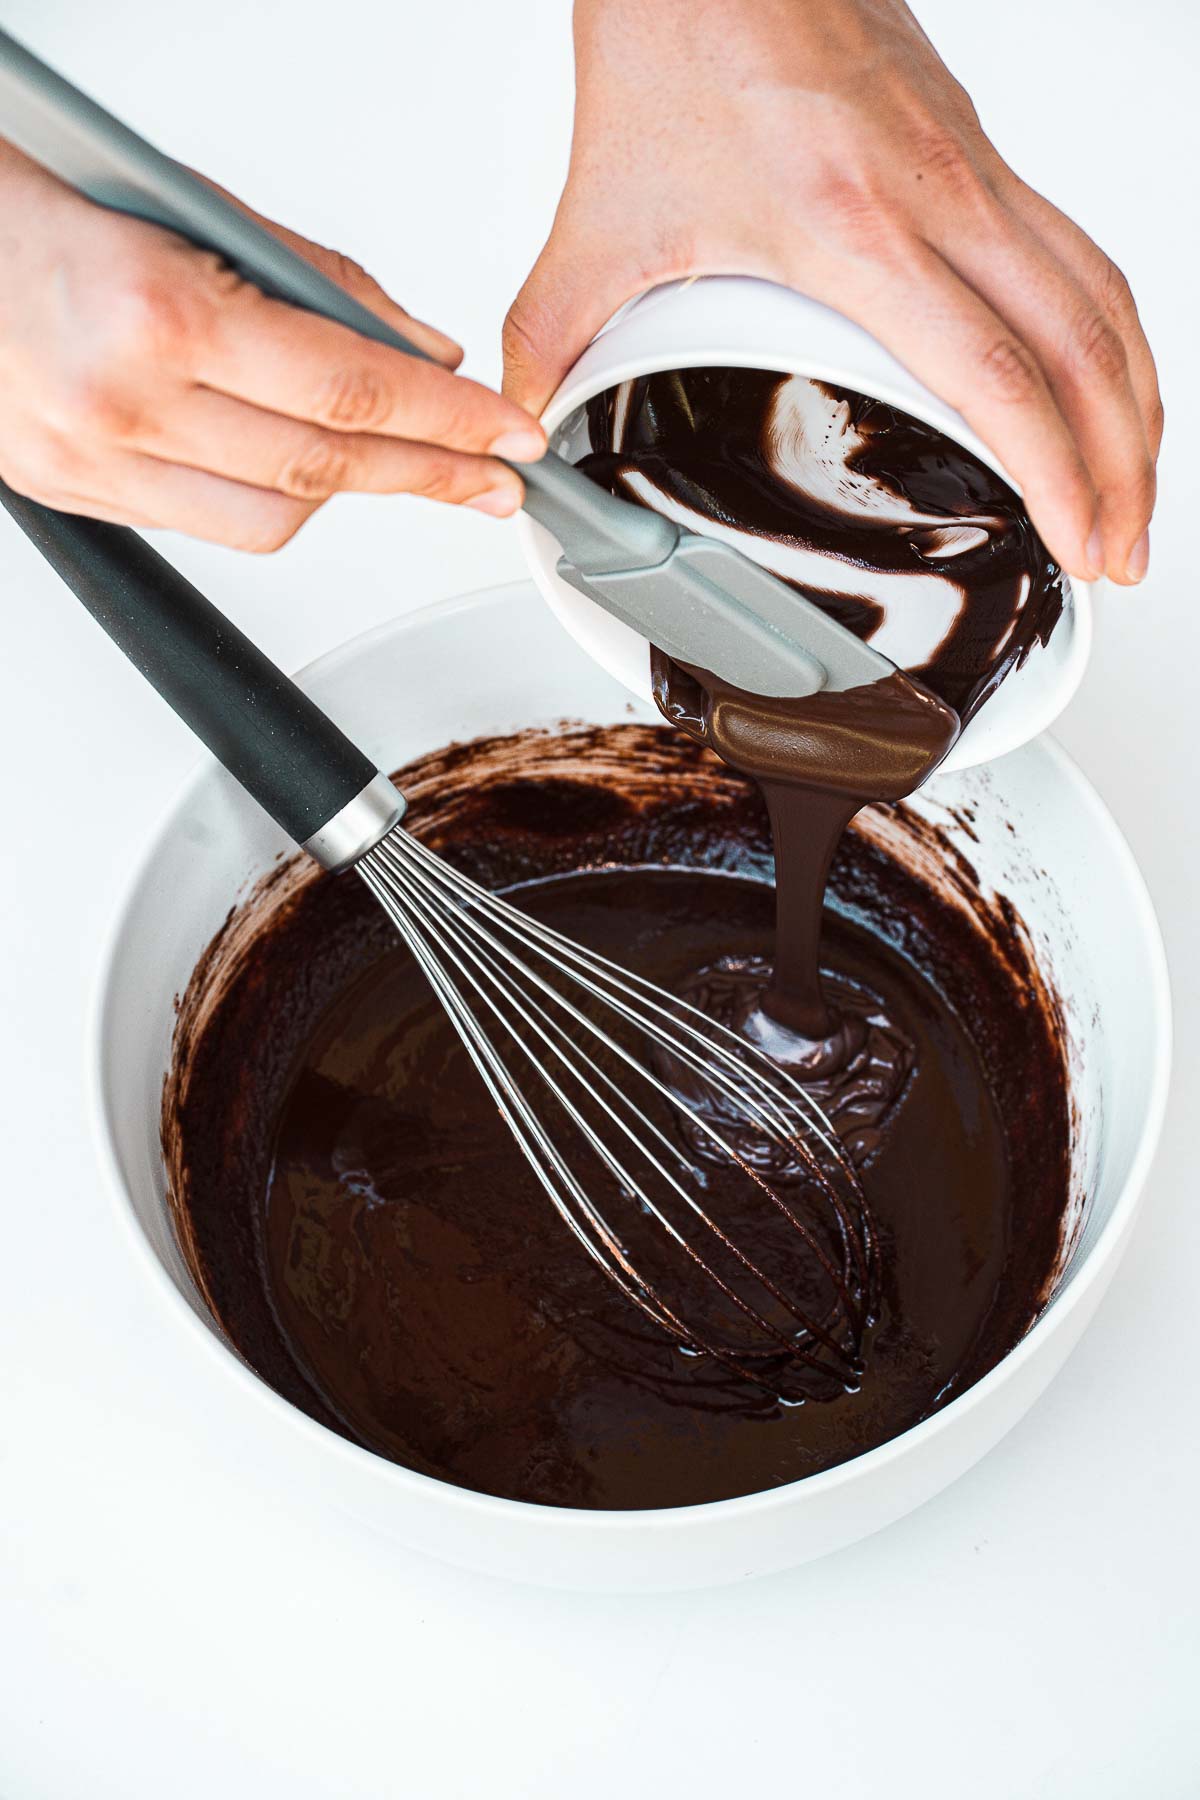 Pouring melted chocolate into a bowl.